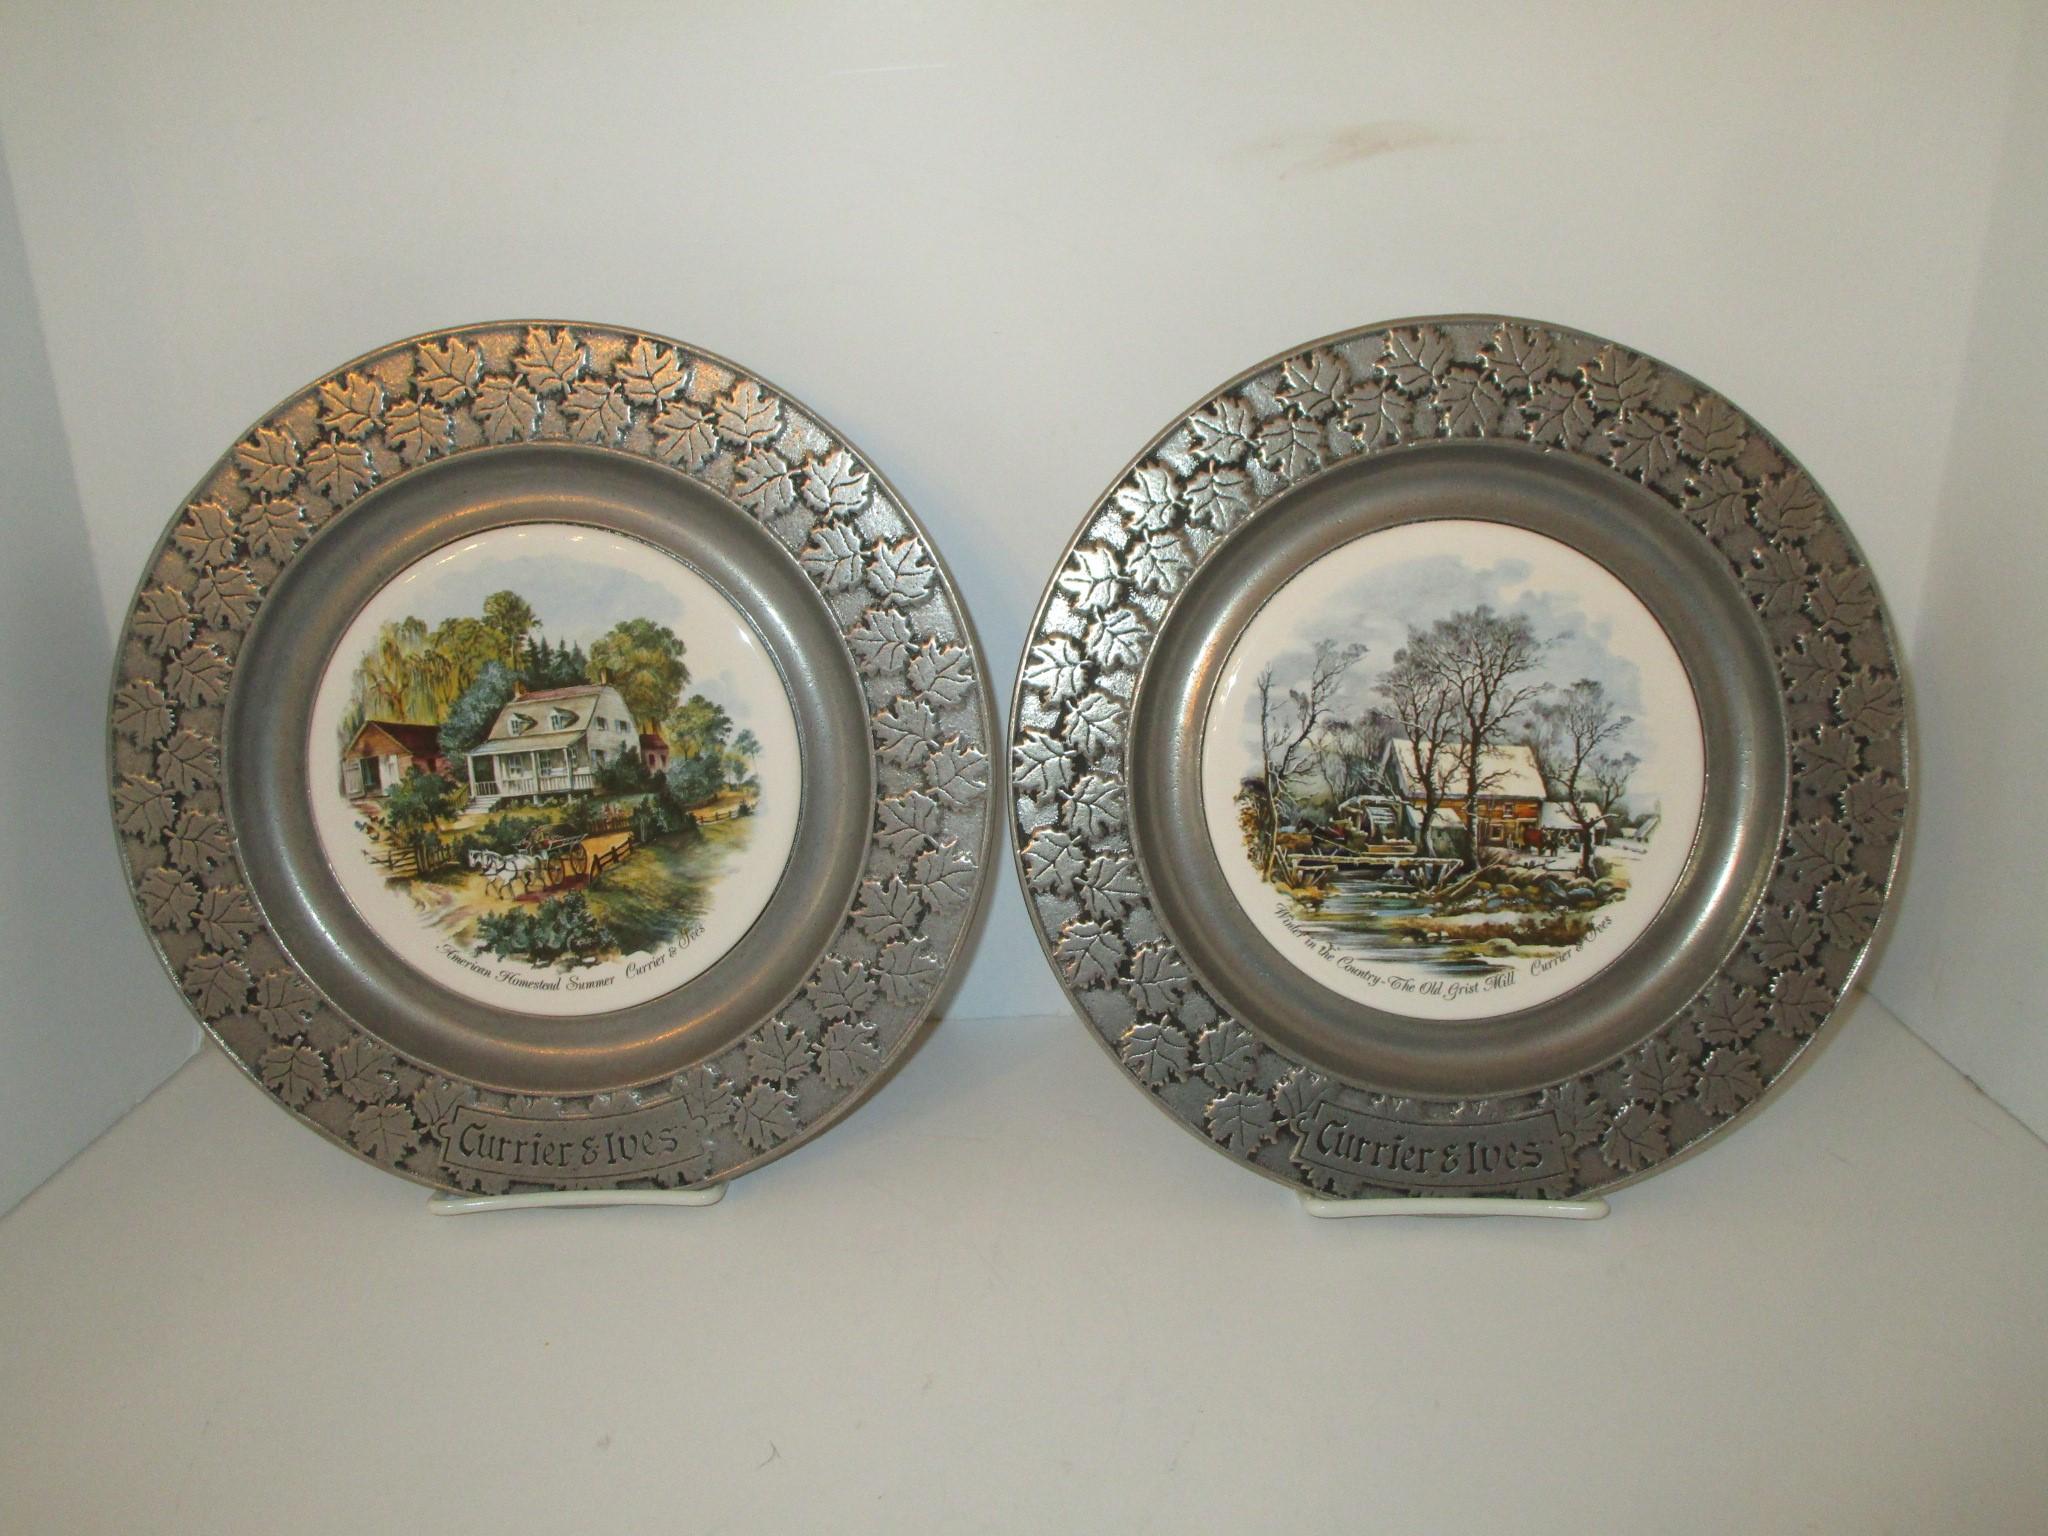 Currier & Ives Pewter Plates by Carson - 10.5"